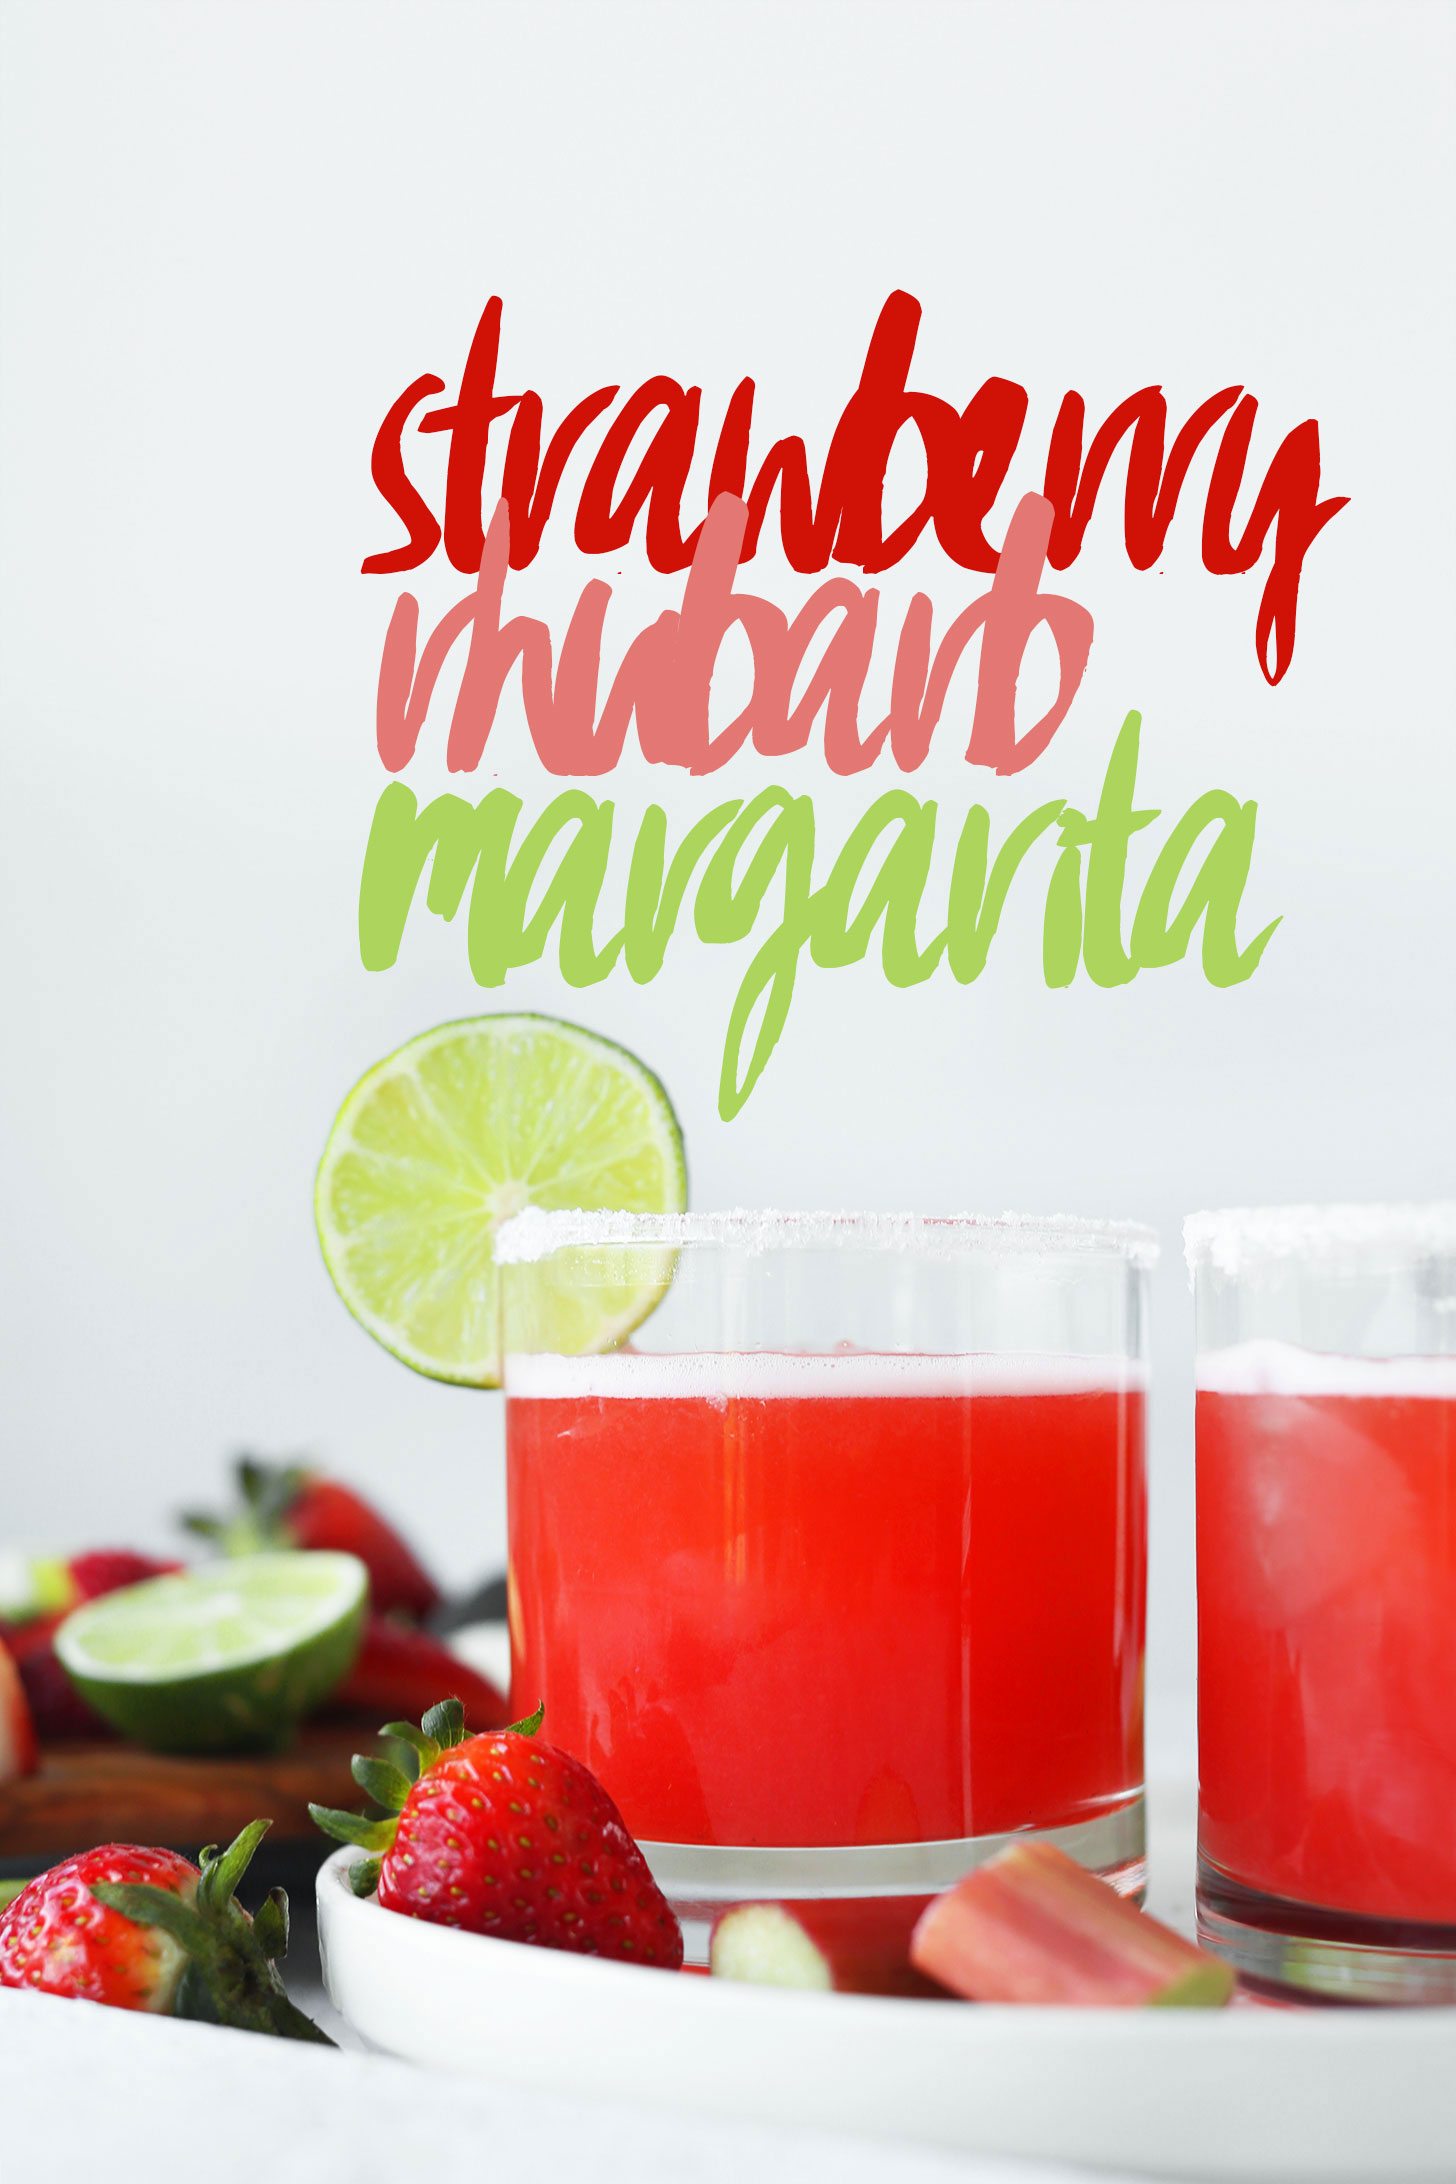 Glasses of our Strawberry Rhubarb Margarita recipe for a delicious spring adult beverage